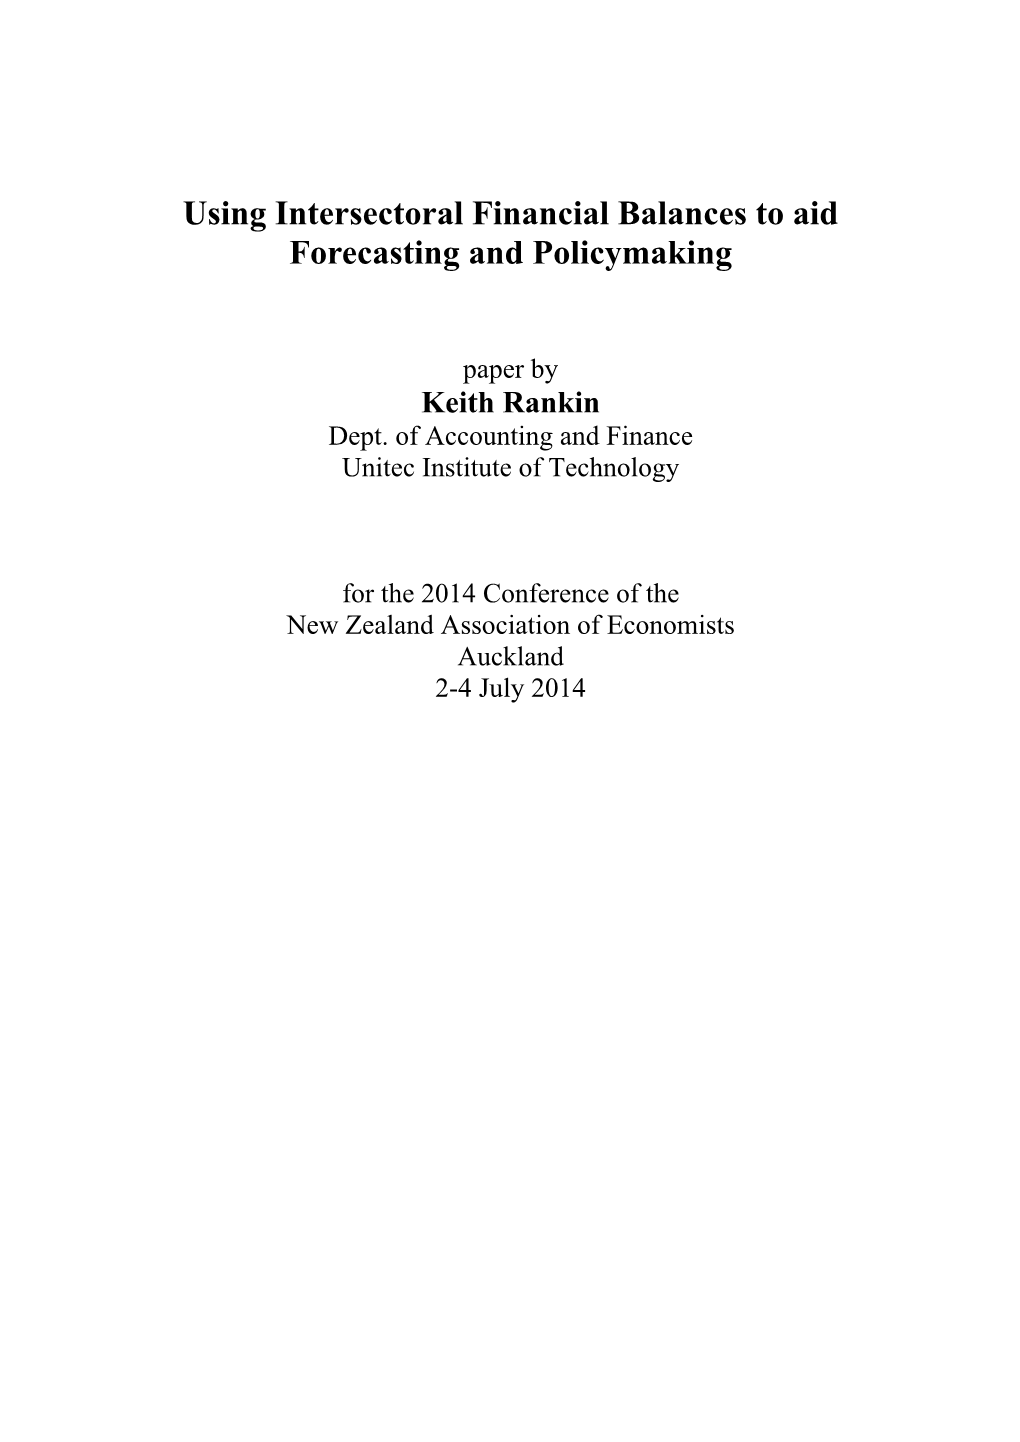 Using Intersectoral Financial Balances to Aid Forecasting and Policymaking